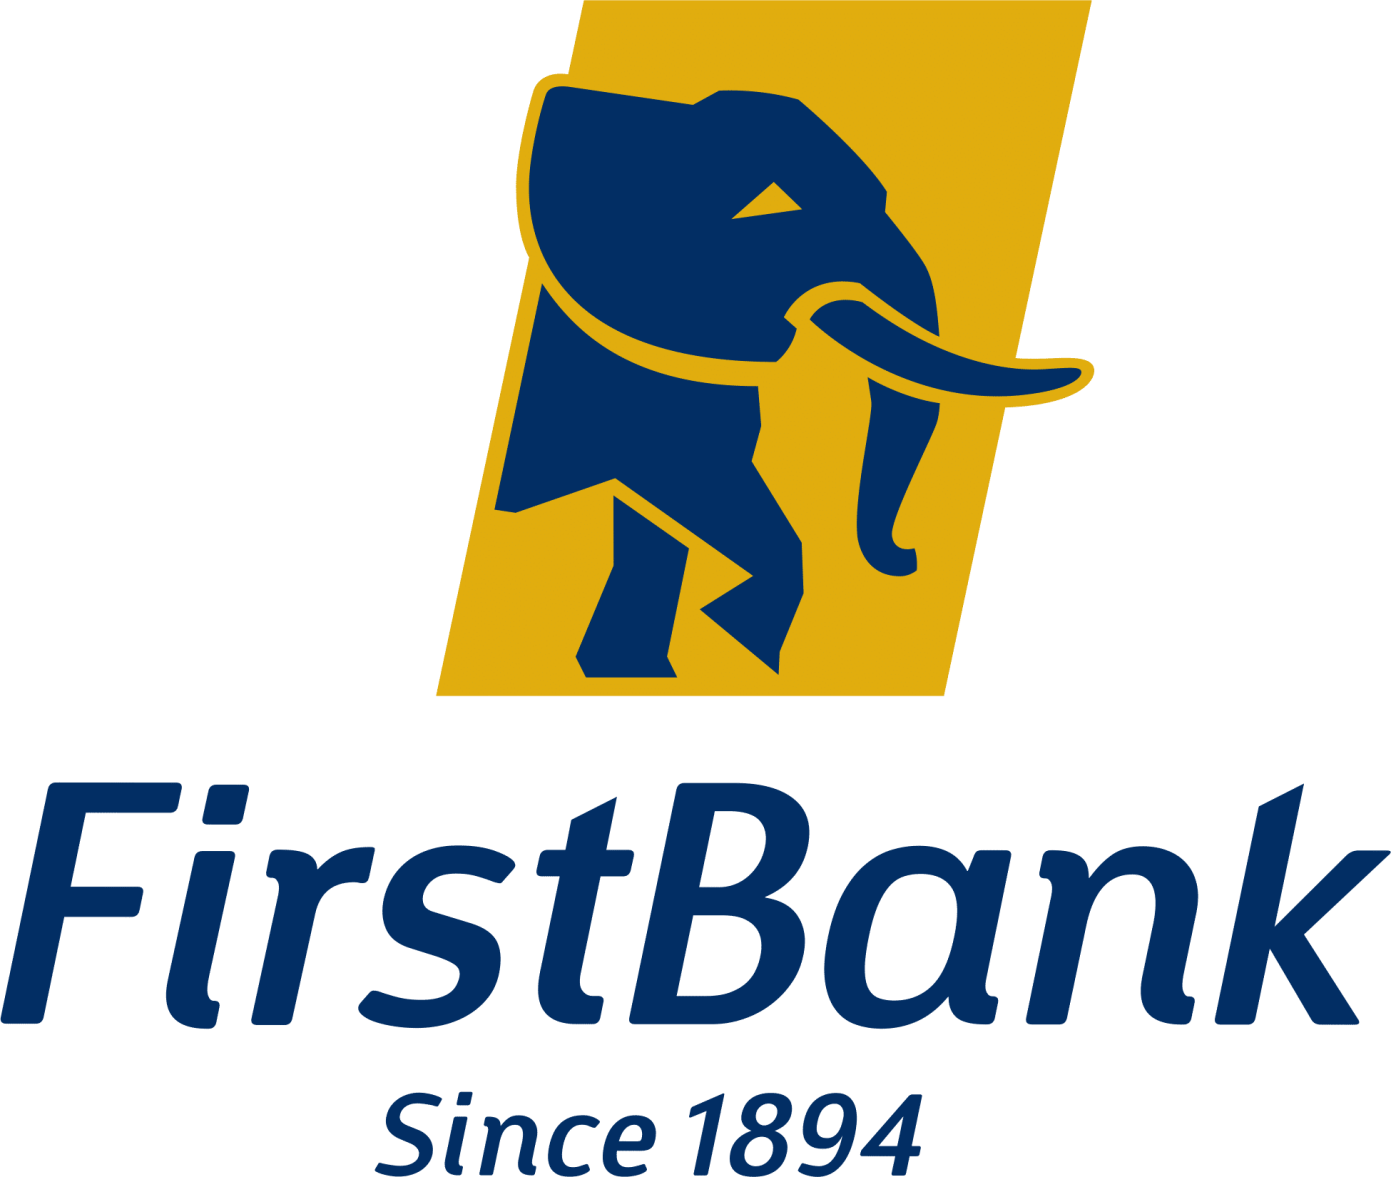 Apply for massive First Bank recruitment 2022 (11 Positions)